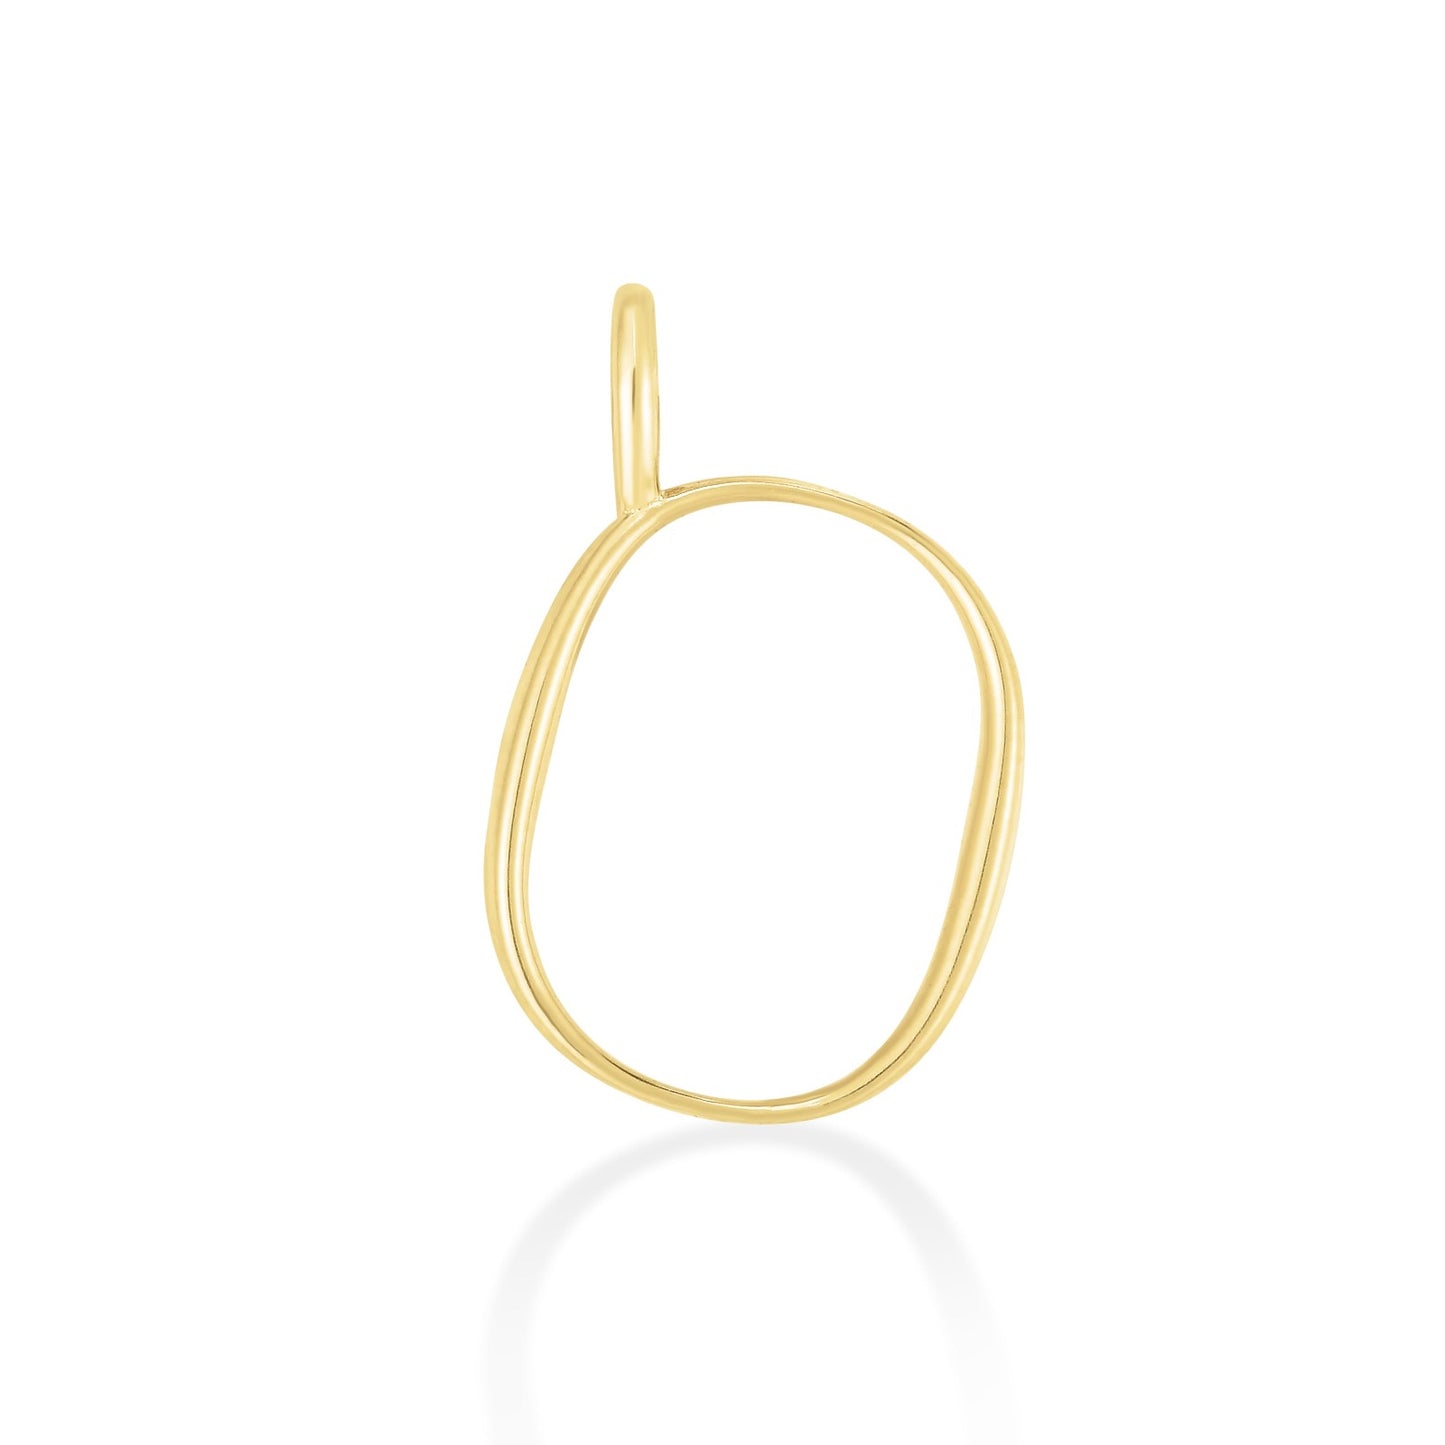 14K yellow gold O letter charm. 